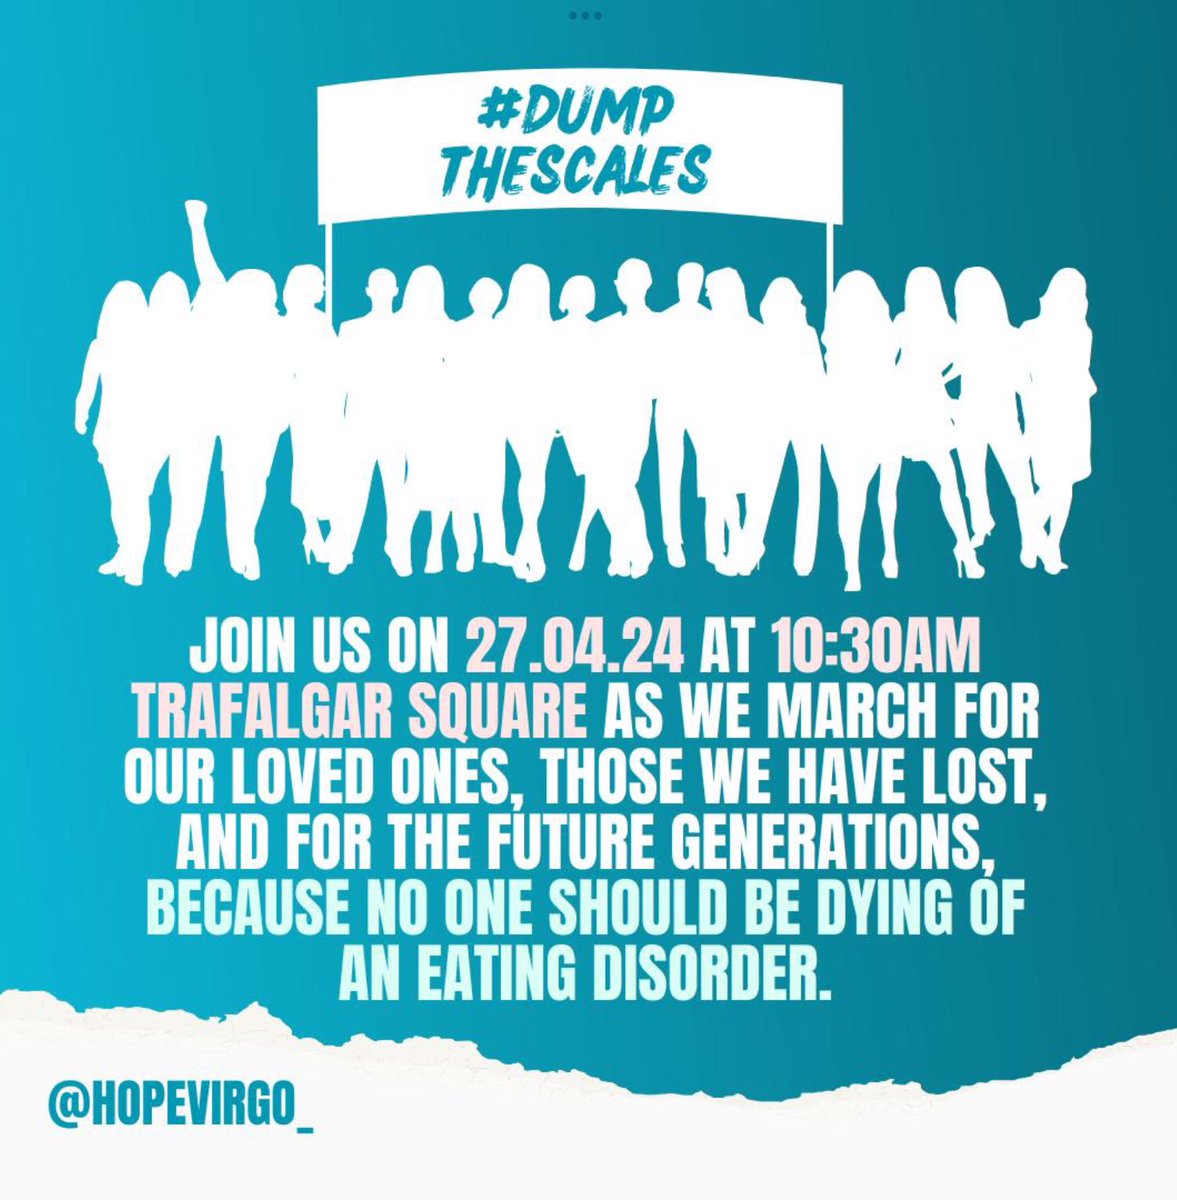 Come and join me at #DumpTheScales march on 27th April, where I’ll be adding my voice for people with eating disorders @HopeVirgo